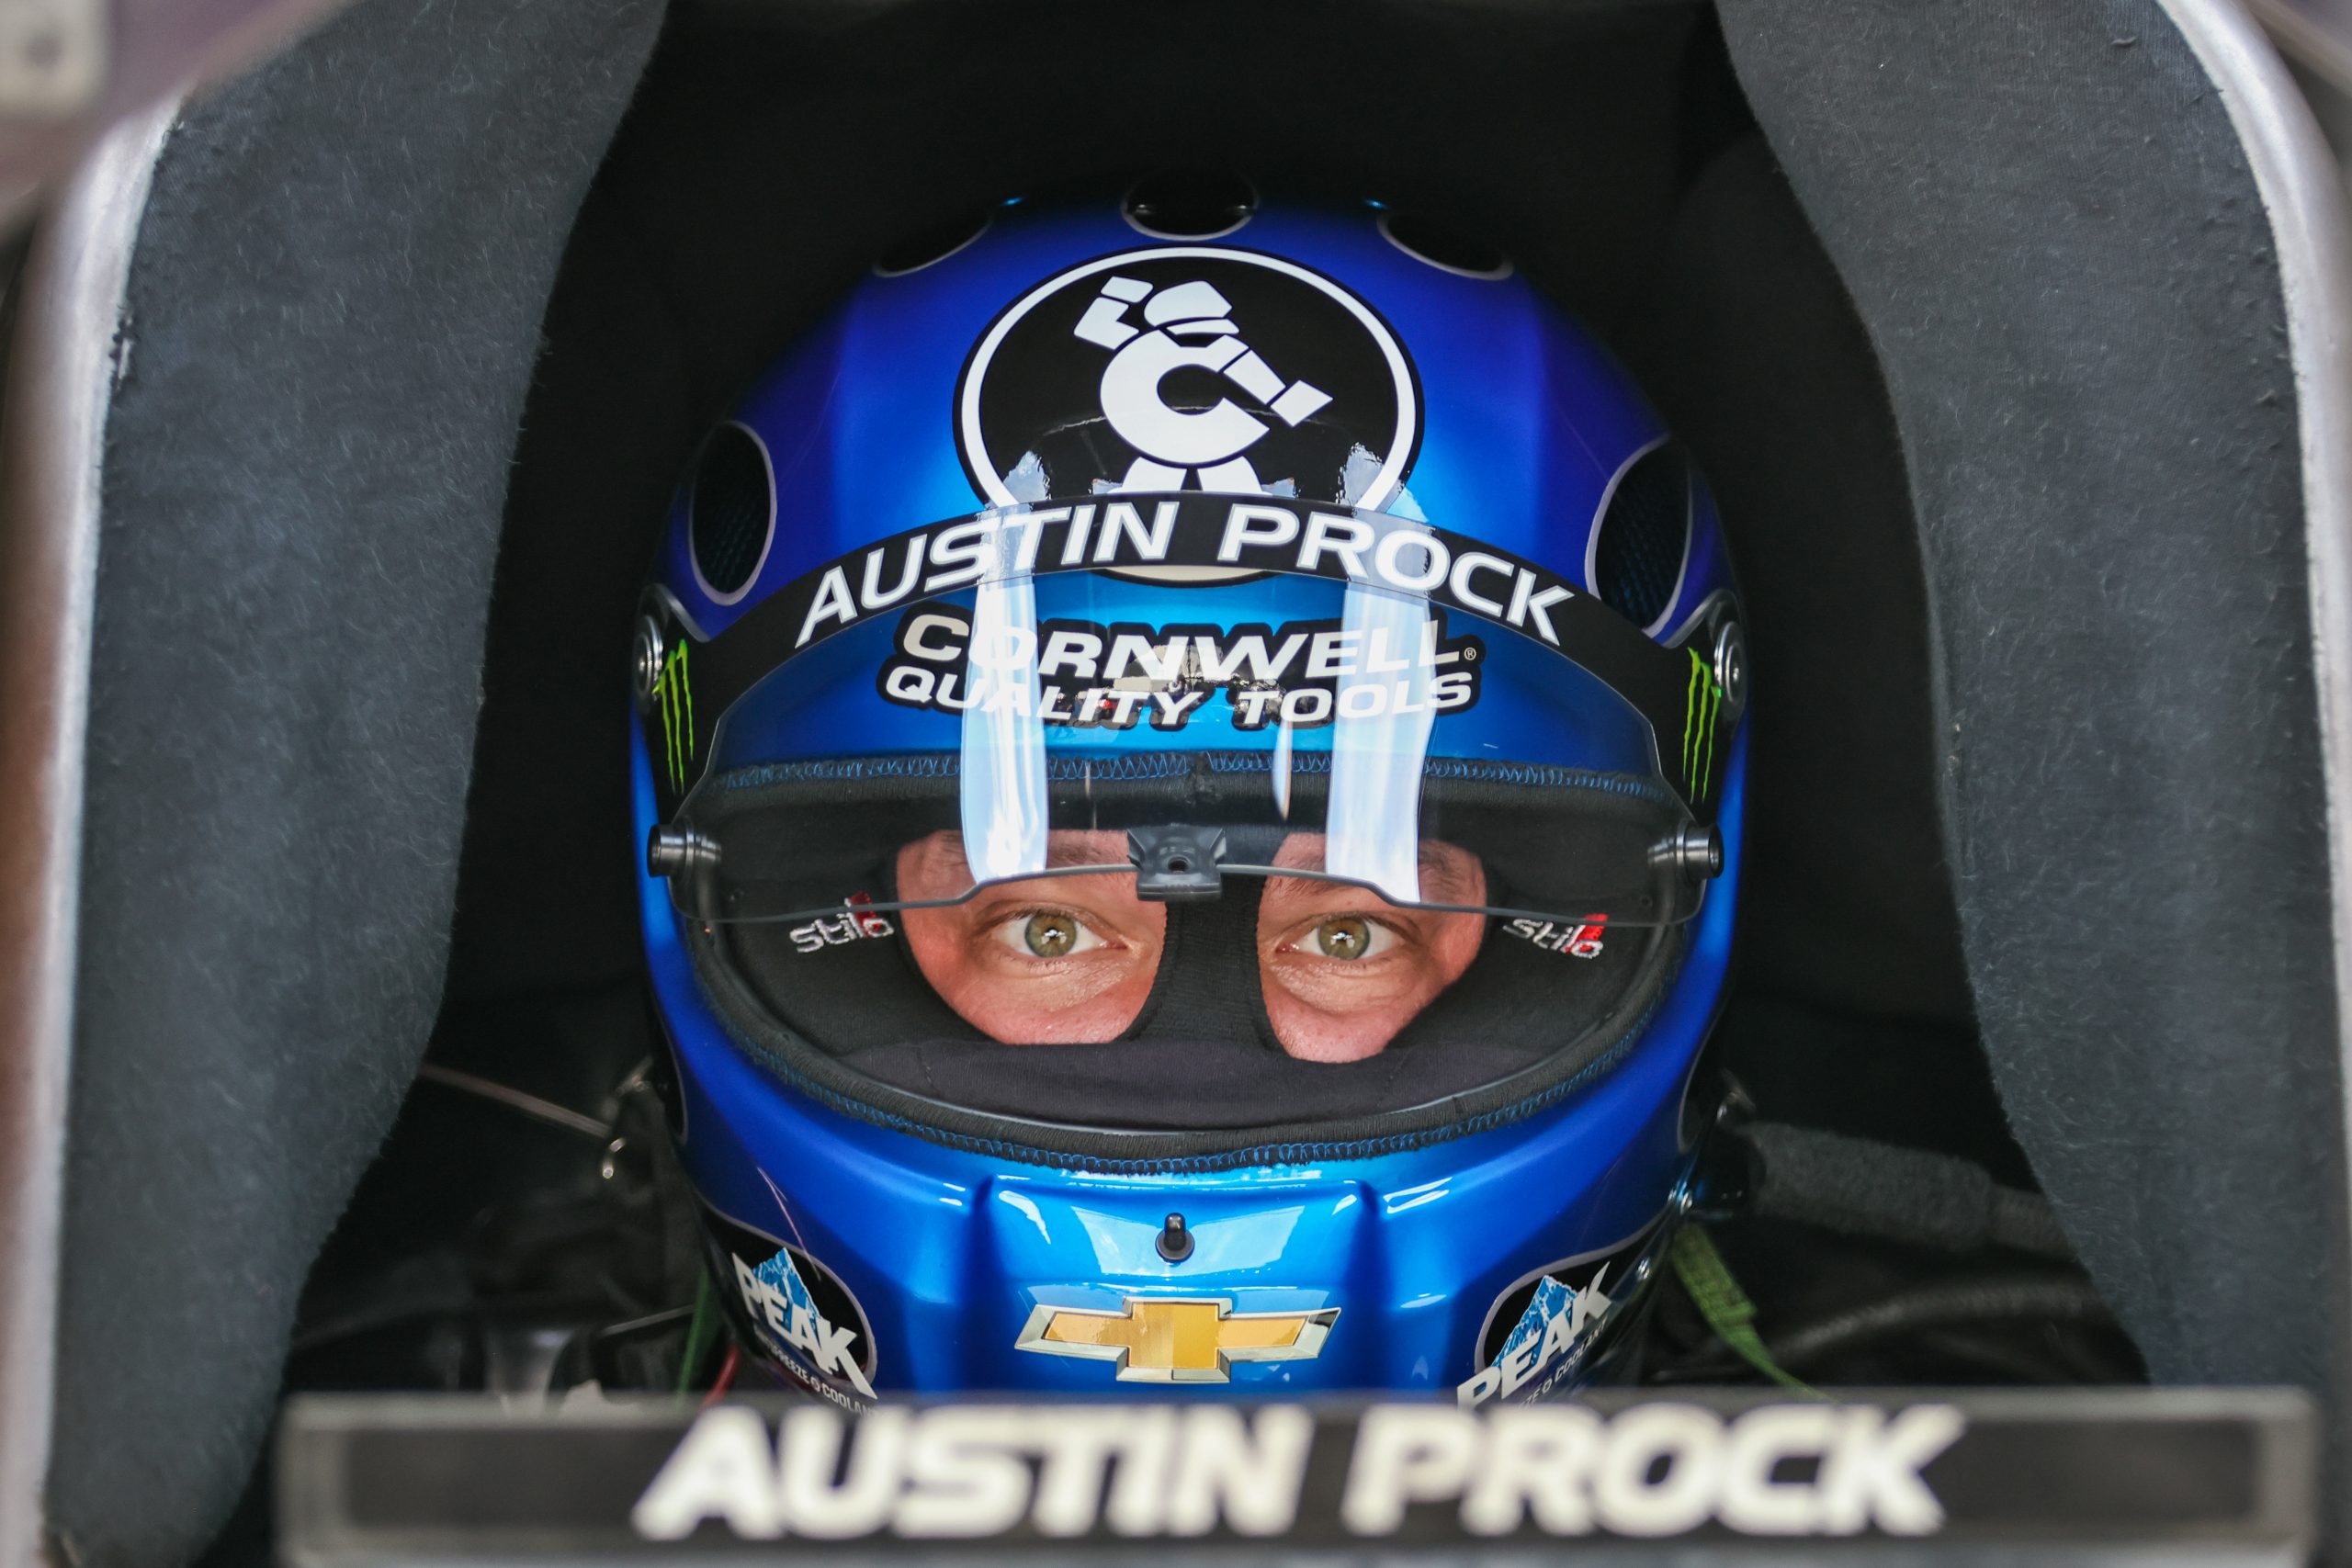 Austin Prock had to keep his focus during an emotional win at Virginia Motorsports Park.